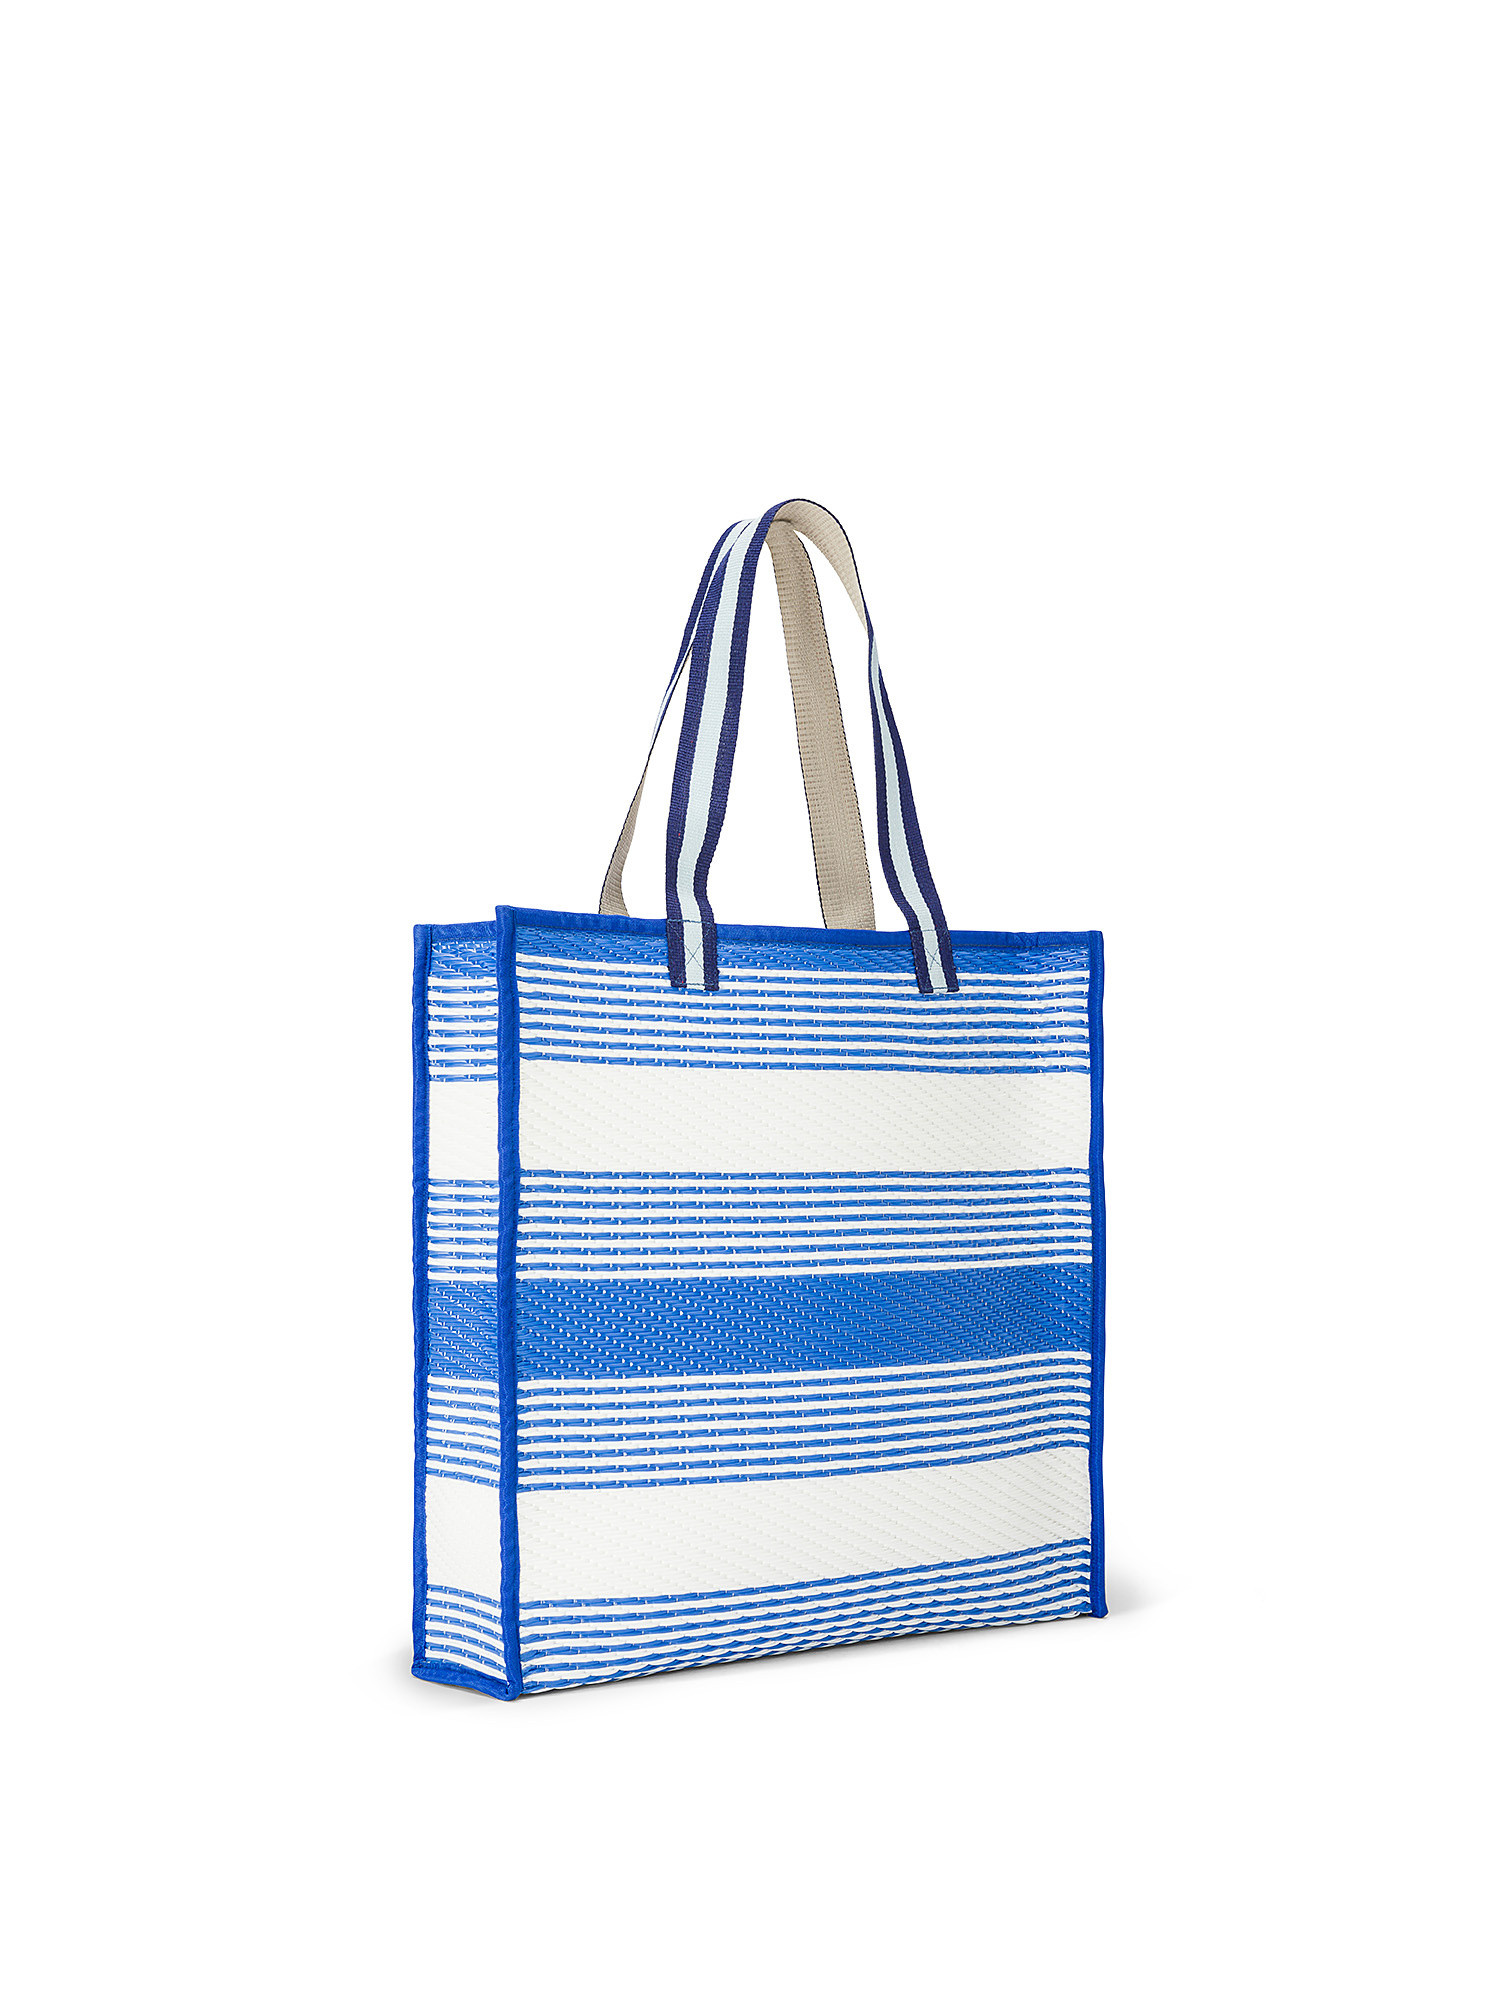 Shopper in recycled plastic., White / Blue, large image number 1